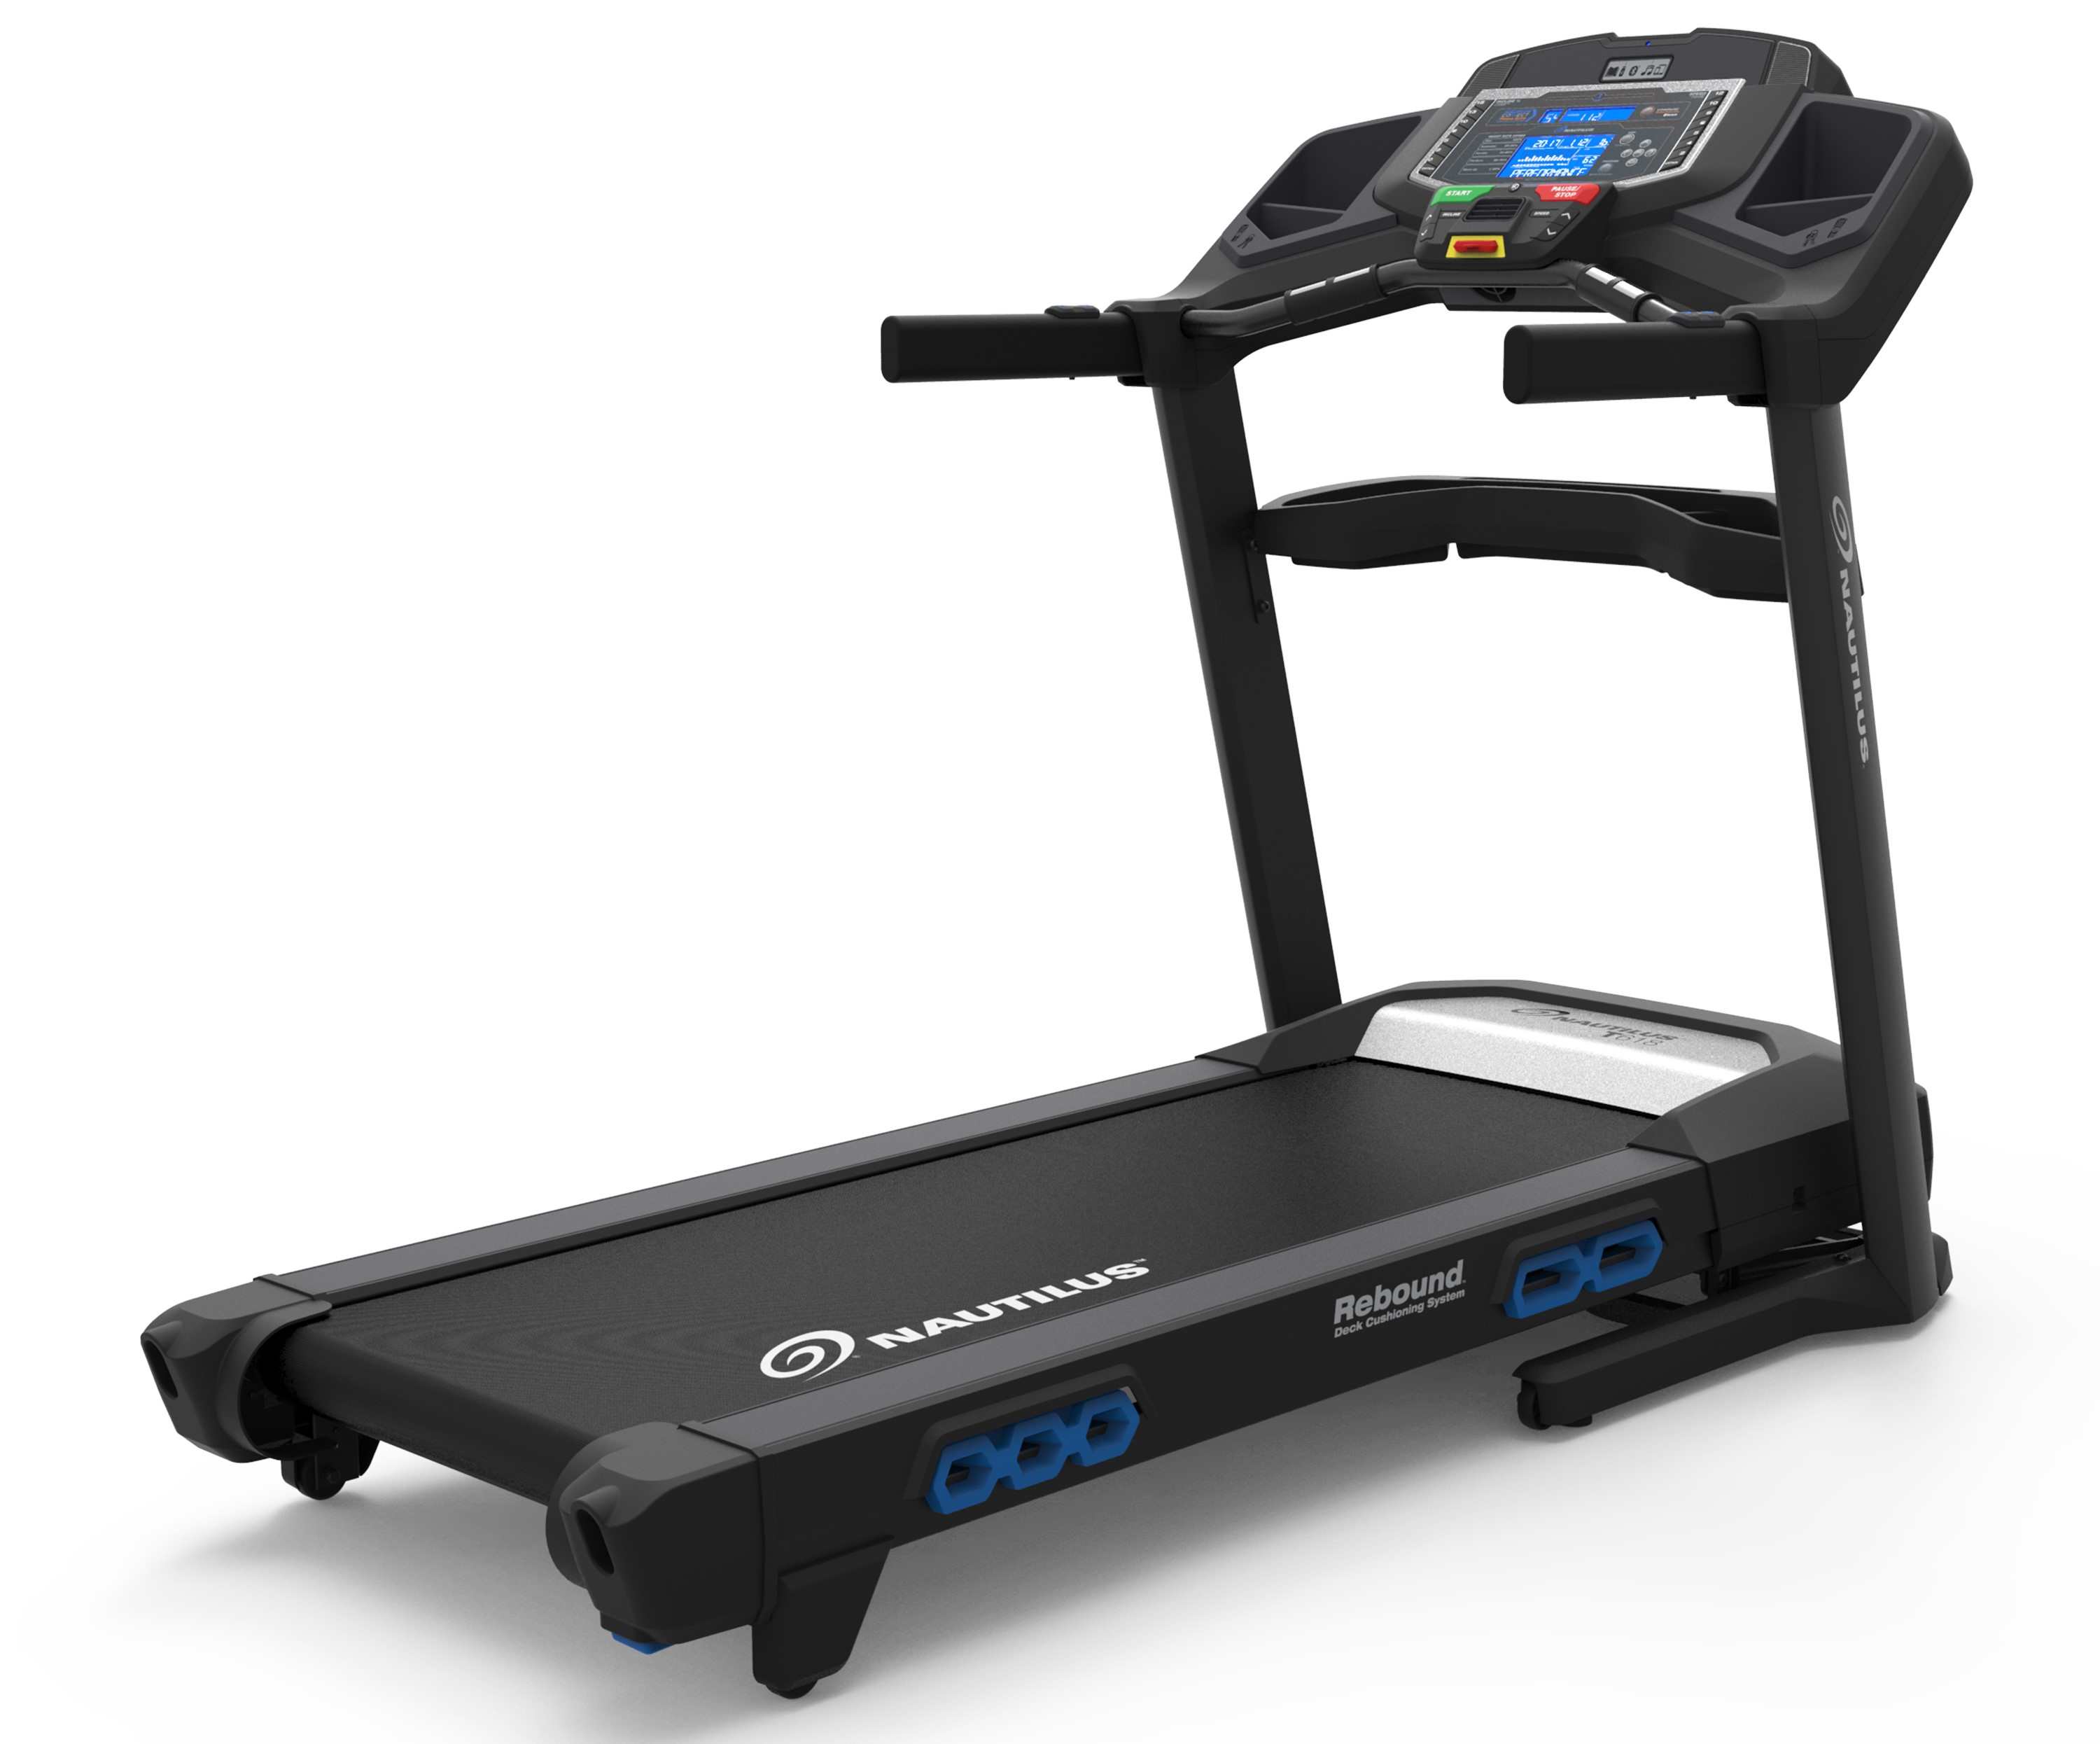 Nautilus T618 Performance Tracking Home Workout Training Treadmill Machine - image 2 of 10